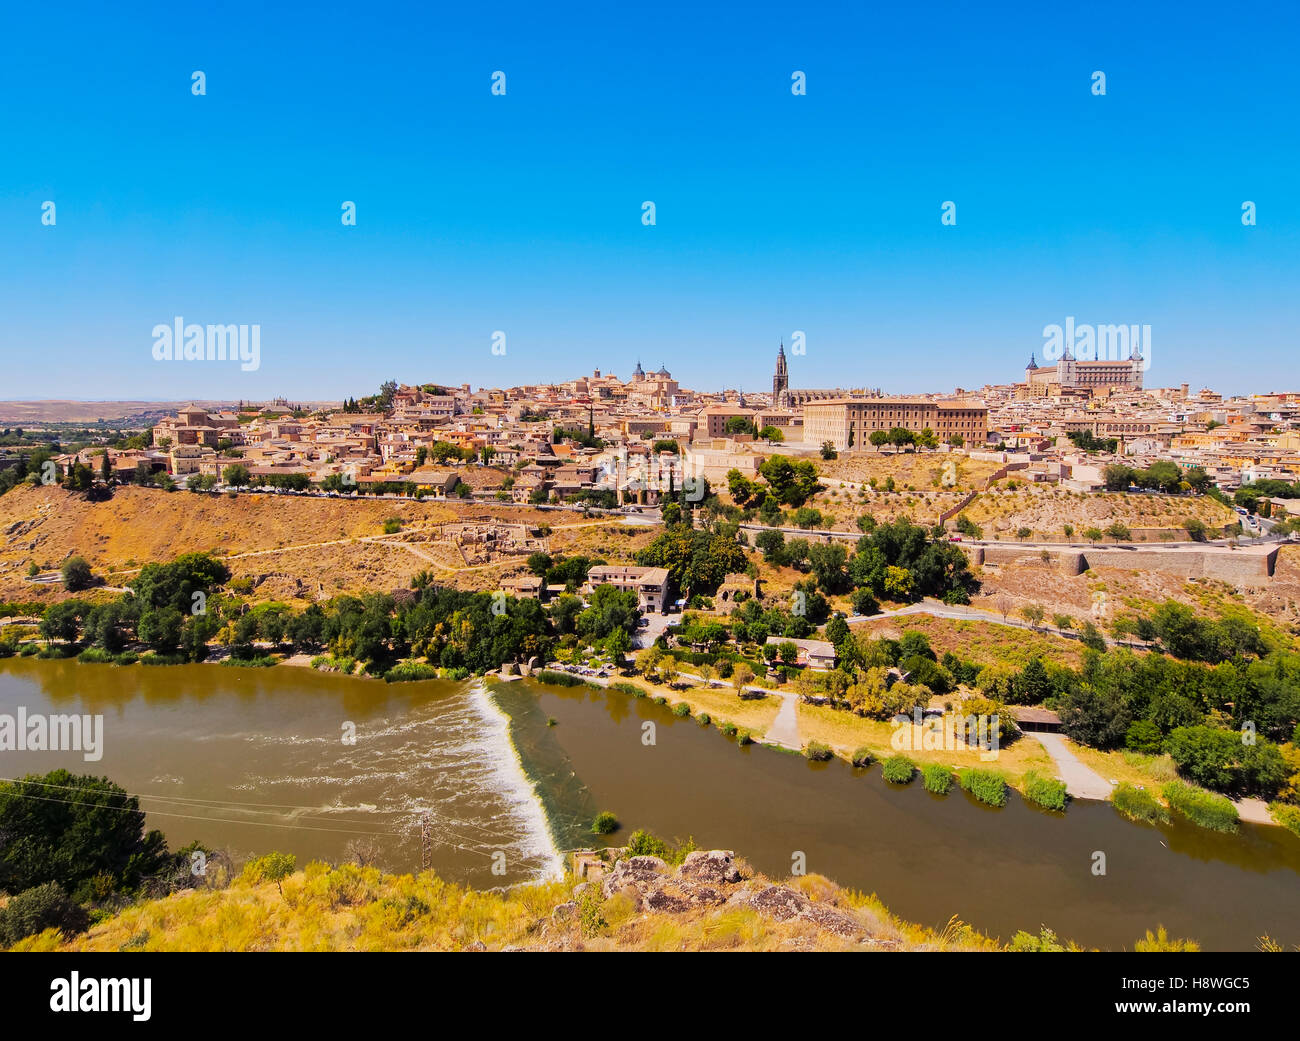 Spain, Castile La Mancha, Toledo, View over the Tagus River towards the Old Town. Stock Photo